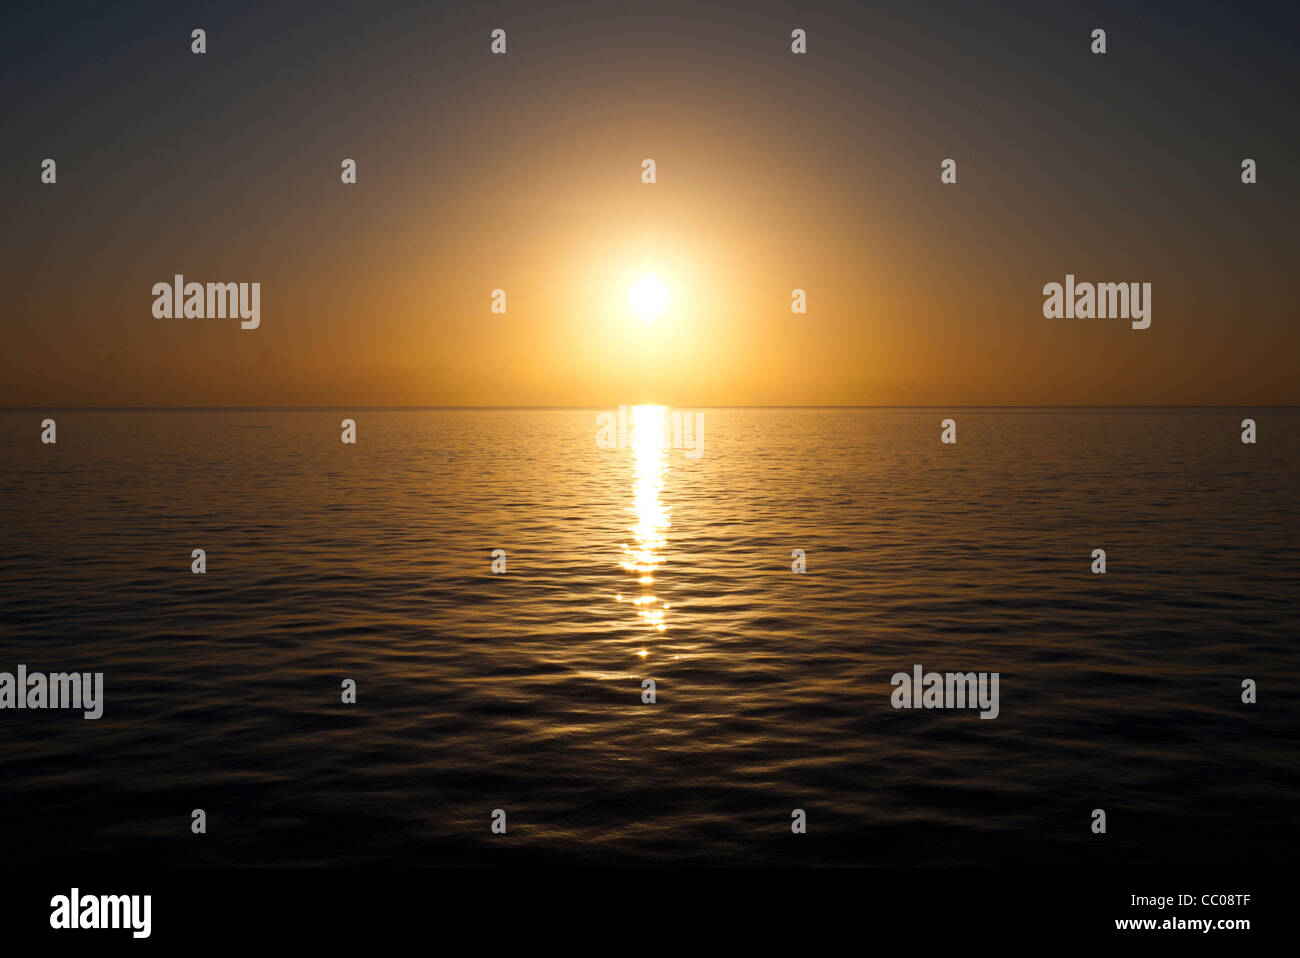 The sun approaches the horizon on a very clear and calm day over the water. Taken at Swains Reef on the southern end of the Great Barrier Reef of the coast of Queensland, Australia. Stock Photo